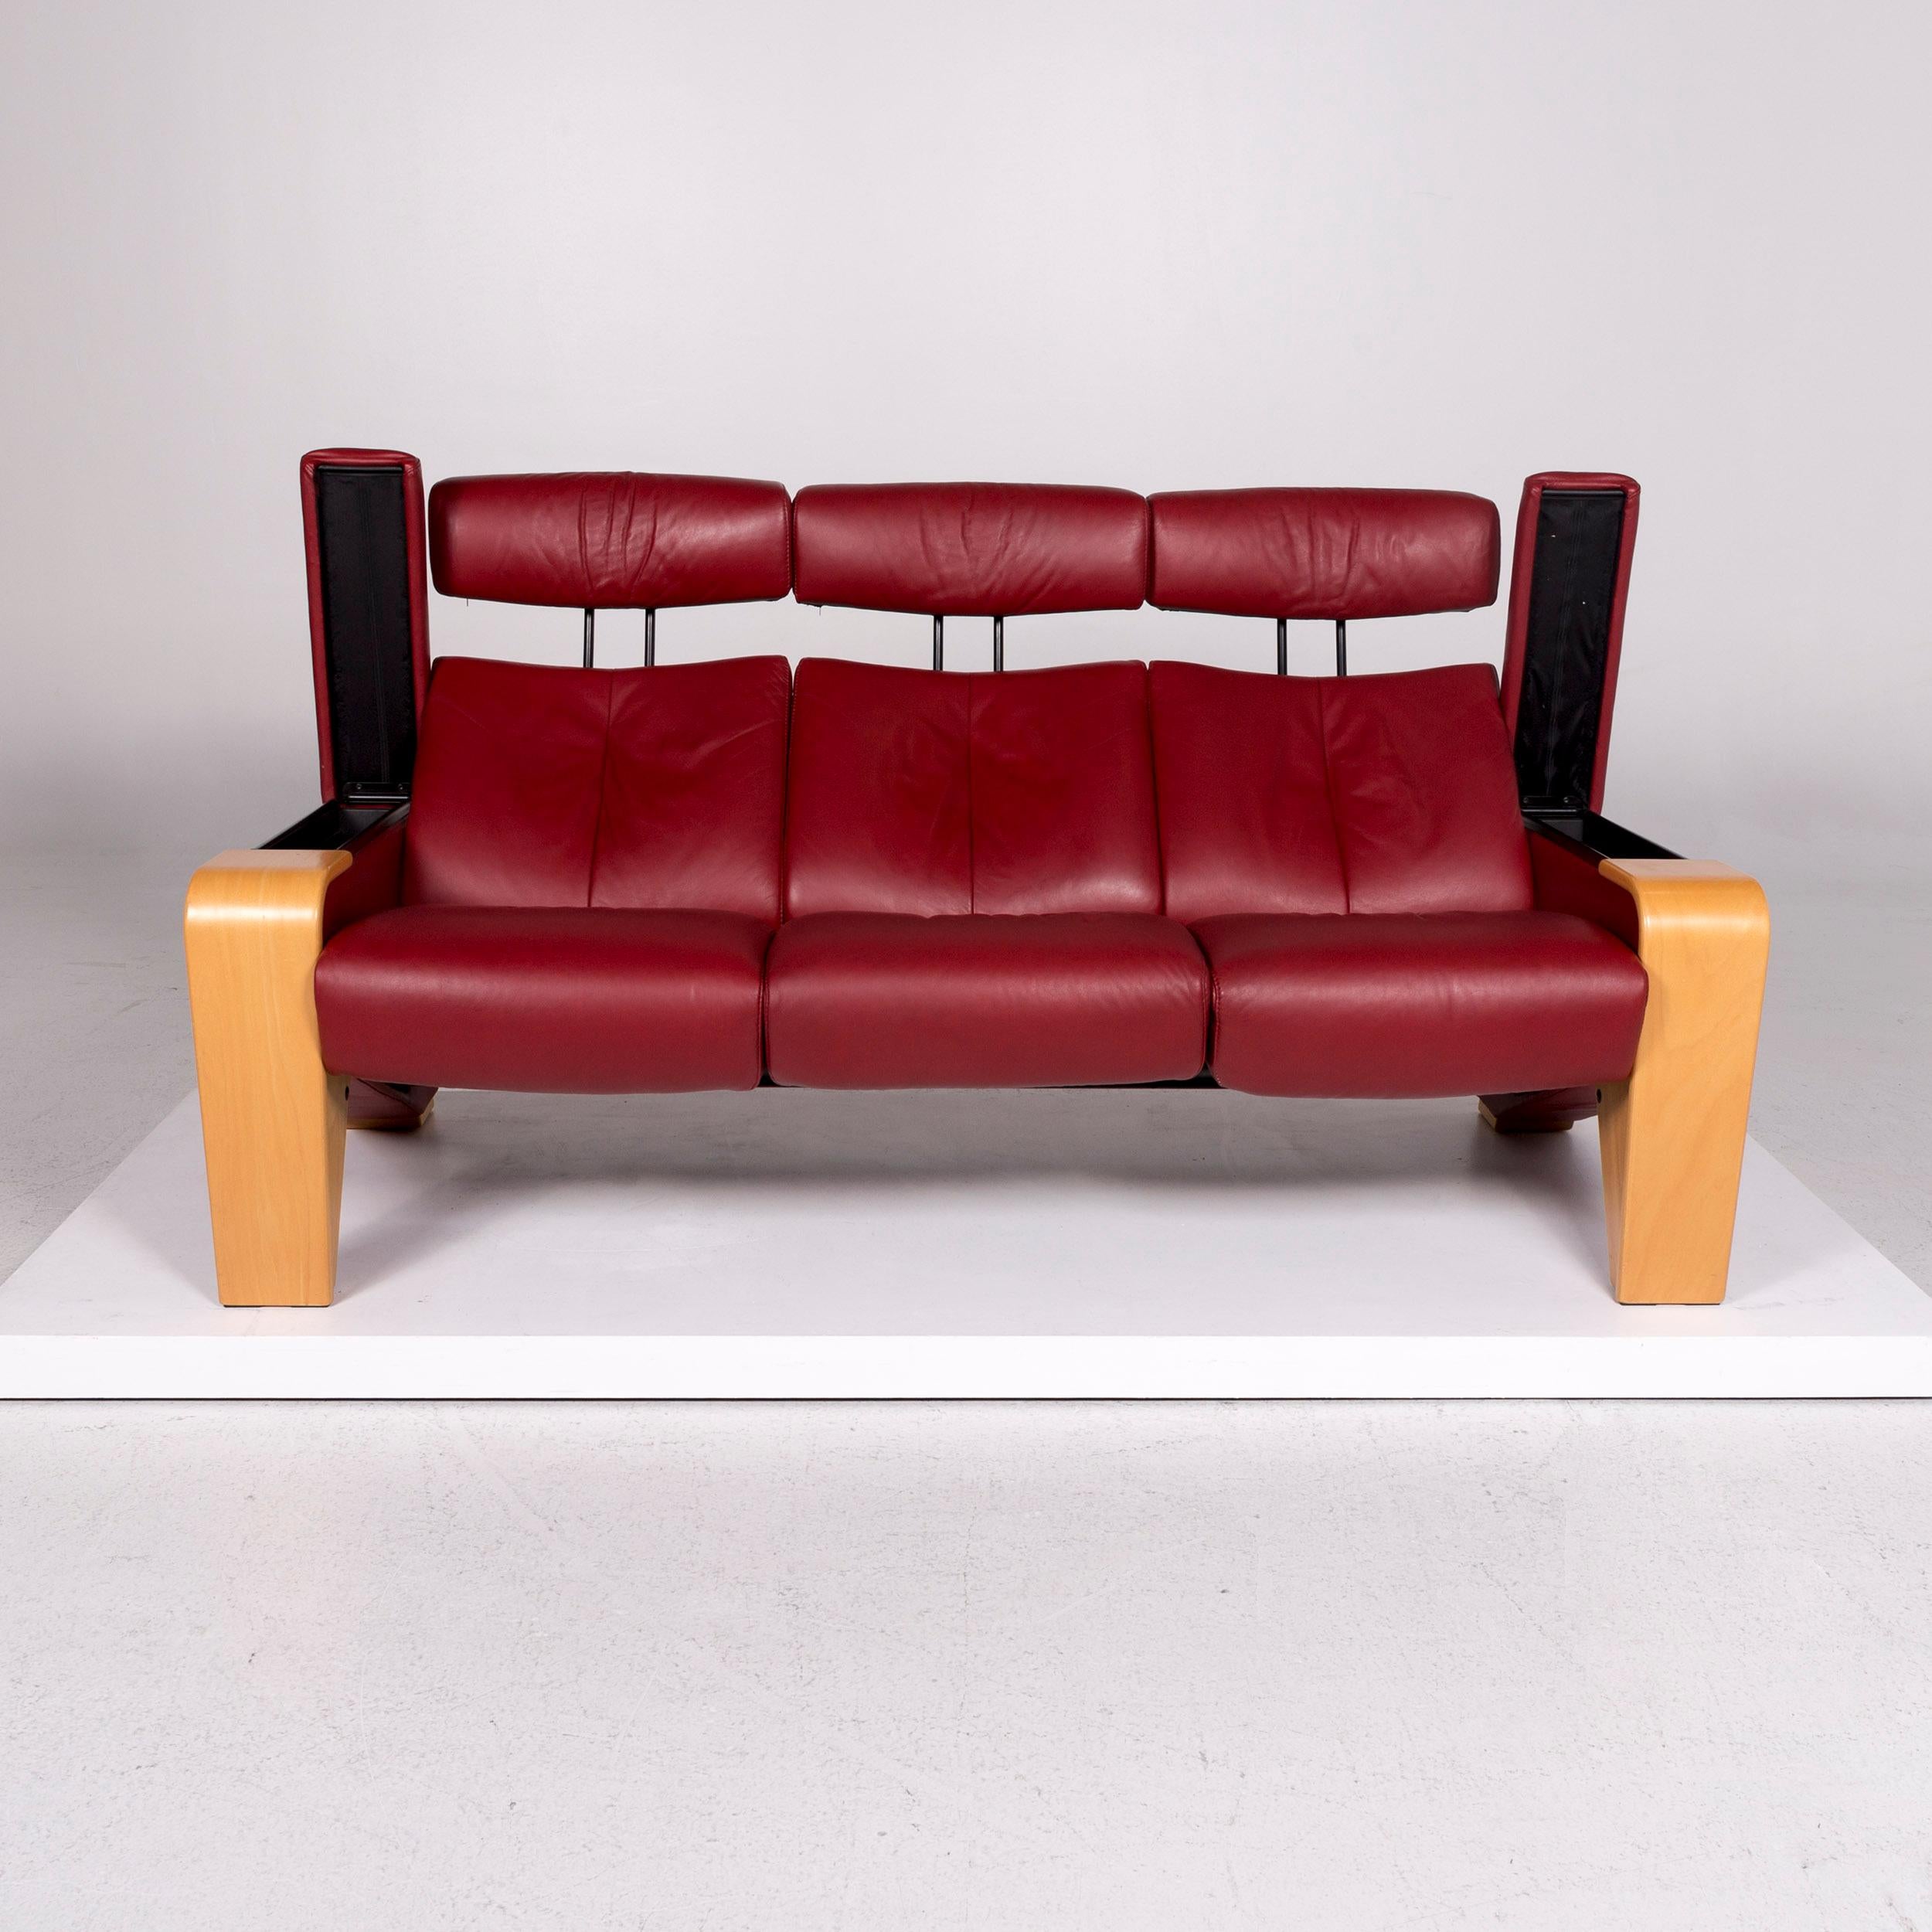 We bring to you a Stressless Pegasus leather sofa red three seater function couch.

 

 Product measurements in centimeters:
 

Depth 79
Width 189
Height 98
Seat-height 43
Rest-height 58
Seat-depth 50
Seat-width 165
Back-height 59.